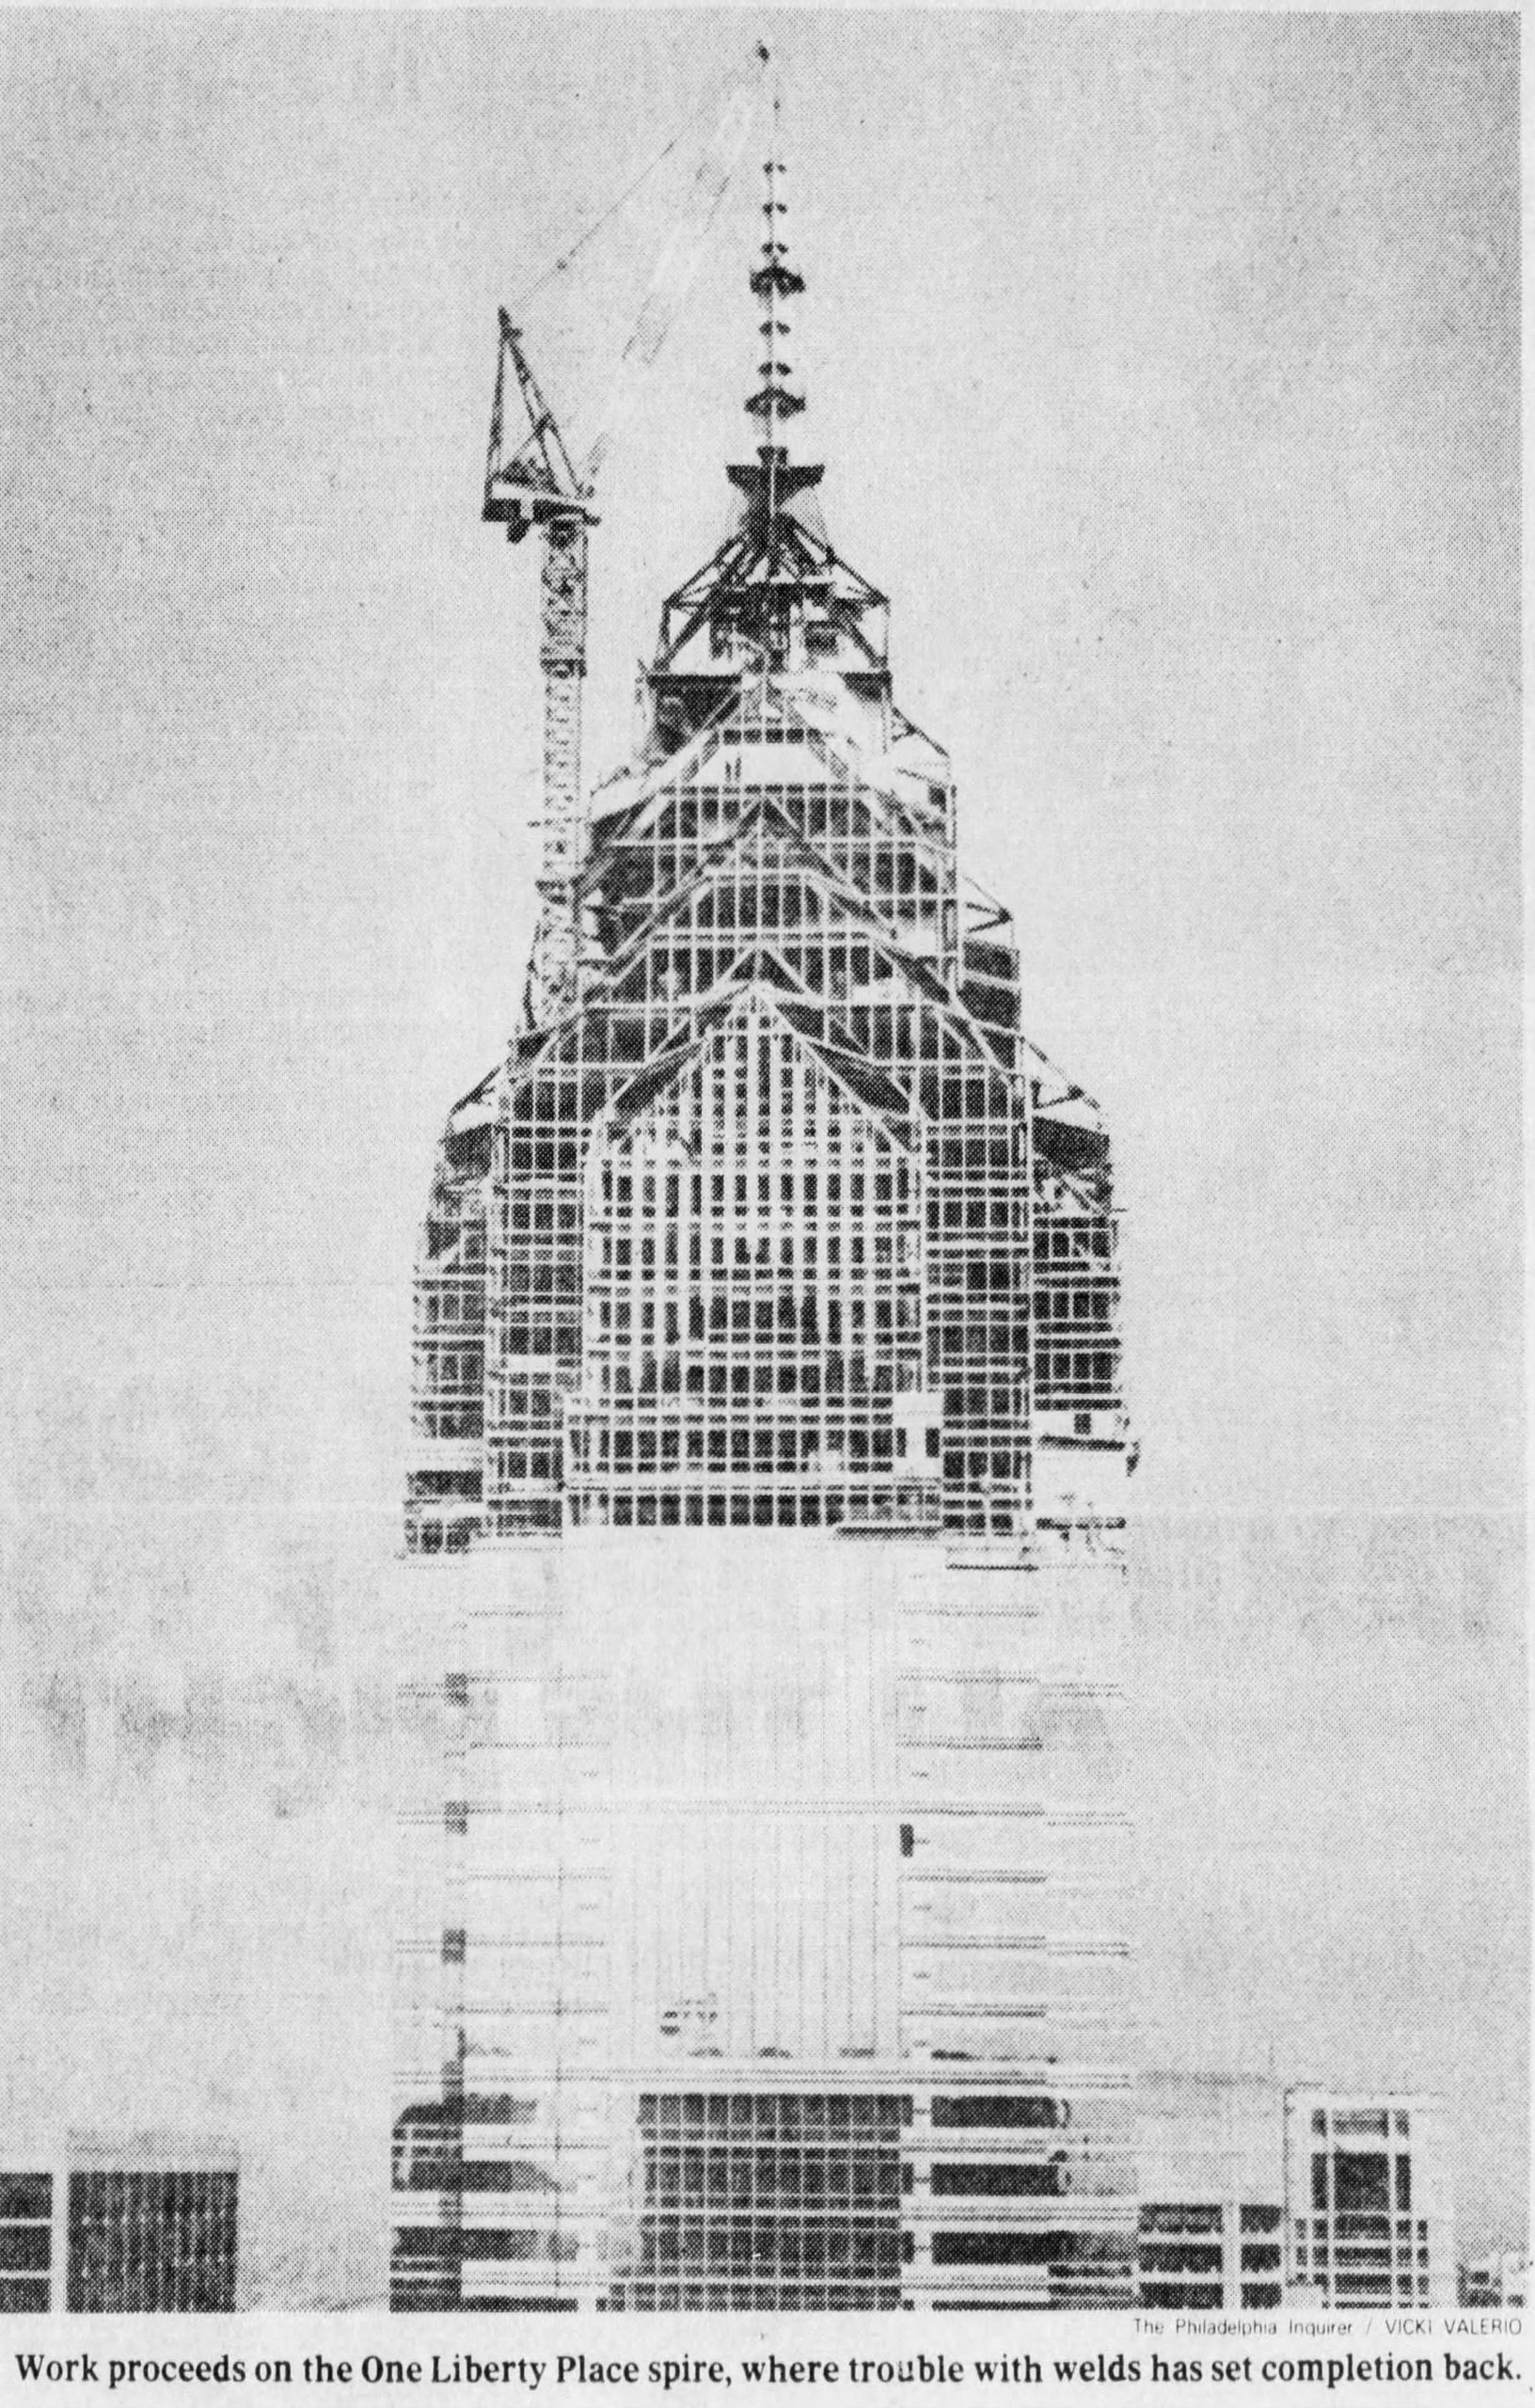 One Liberty Place before topping of the spire. Photo from the Philadelphia Inquirer